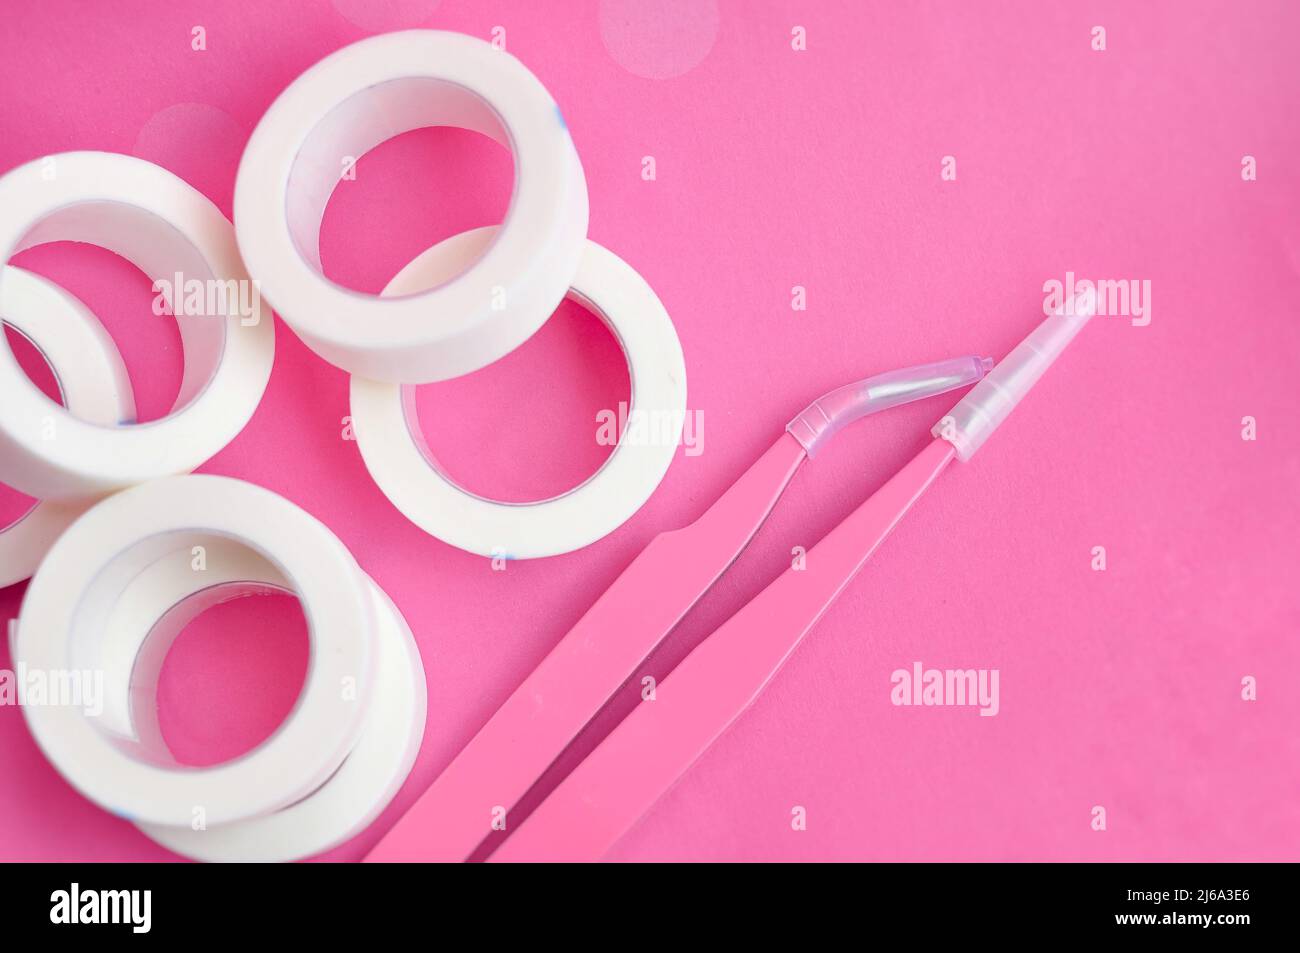 tweezers for eyelash extensions on pink background for lashmakers Stock Photo